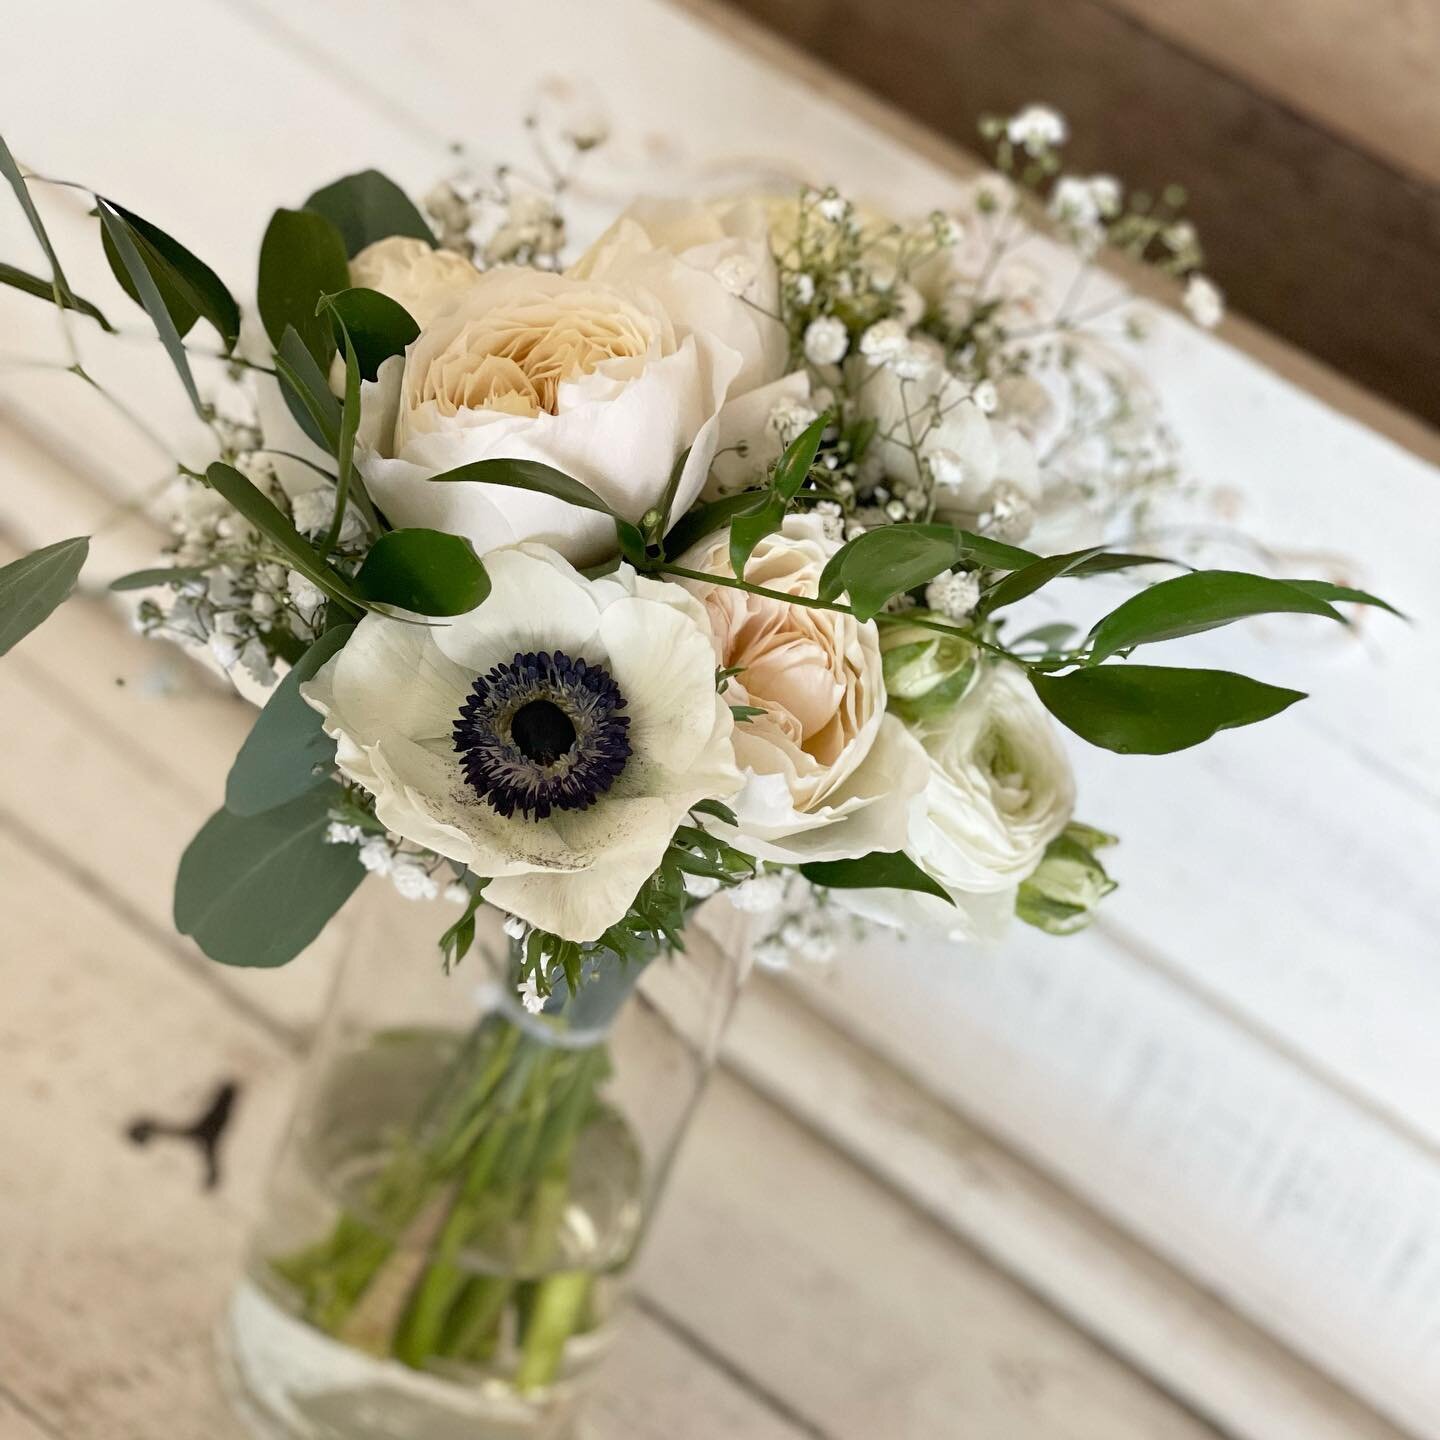 Pretties from @brittanybloomskc designed in the @kcbloomhub this week. Love these soft colors!! #weddingflowers #flowers #floraldesign #kcbloomhub #bridal #kansascityweddings #weddingflorals